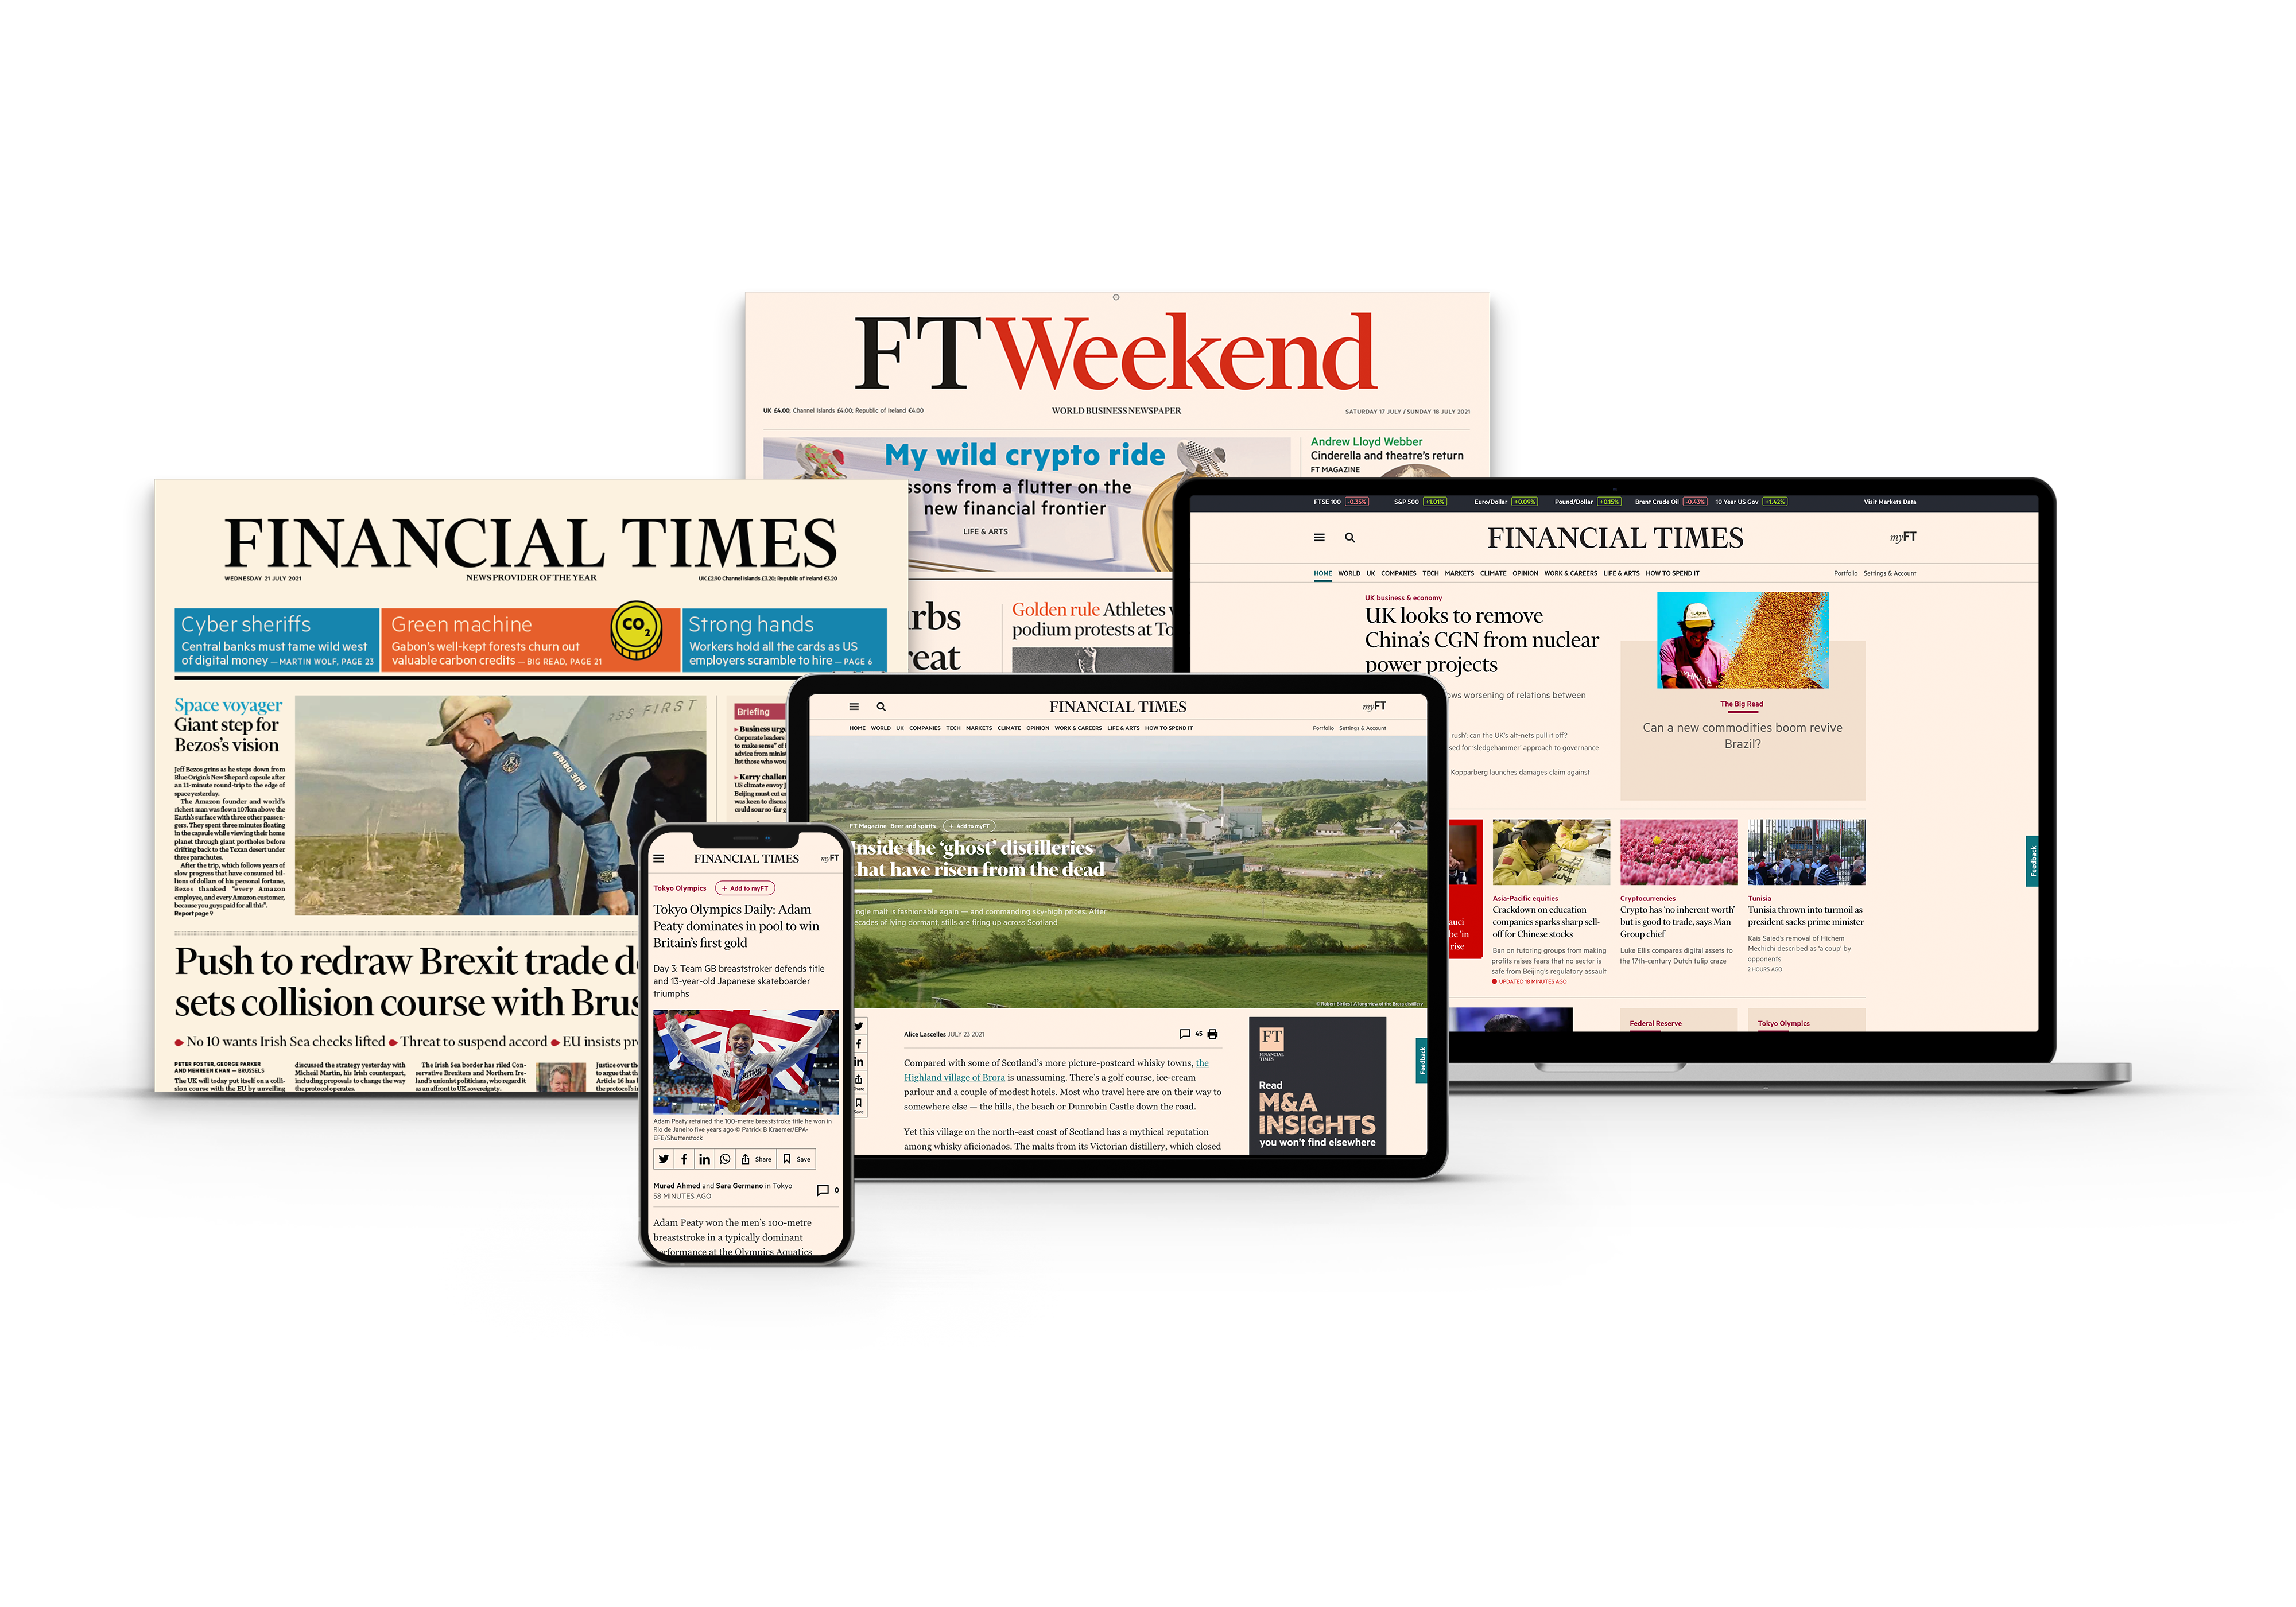 The Financial Times today announced a strategic partnership and licensing agreement with OpenAI, a leader in artificial intelligence research and depl